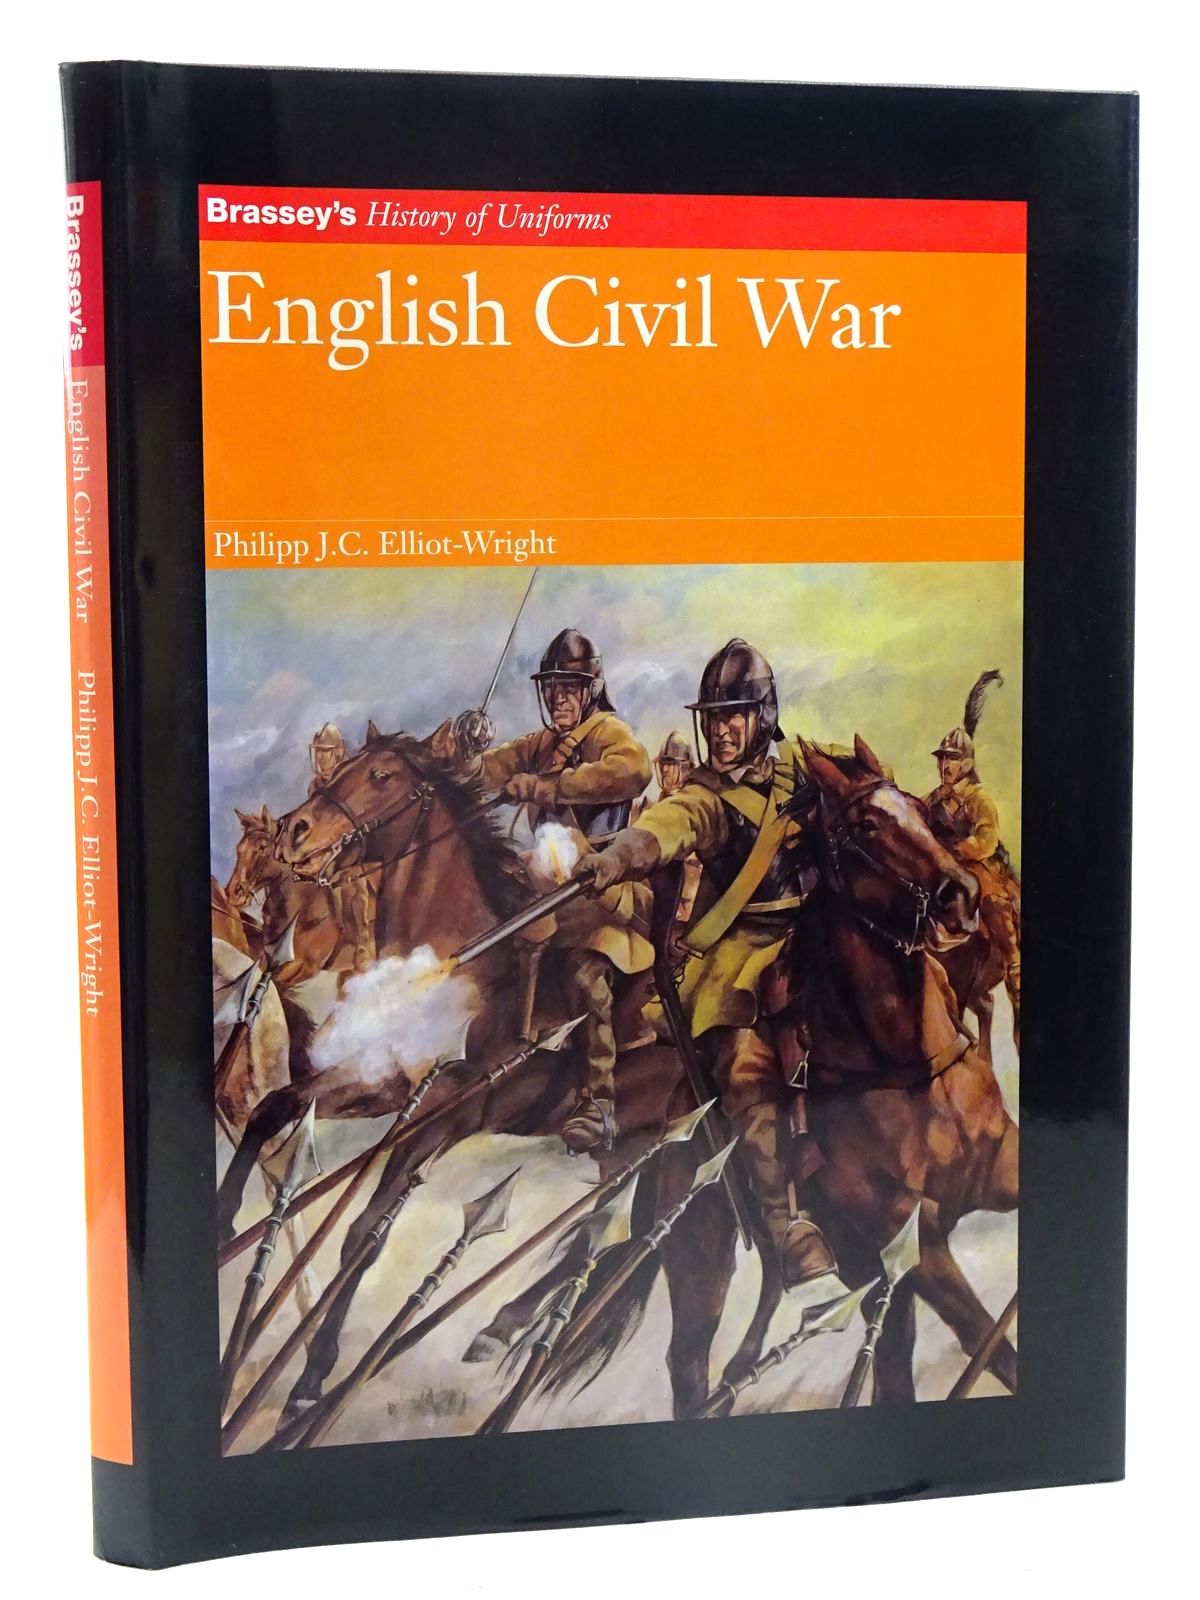 Photo of ENGLISH CIVIL WAR written by Elliot-Wright, Philipp J.C. illustrated by Hook, Christa published by Brassey's (STOCK CODE: 2125467)  for sale by Stella & Rose's Books